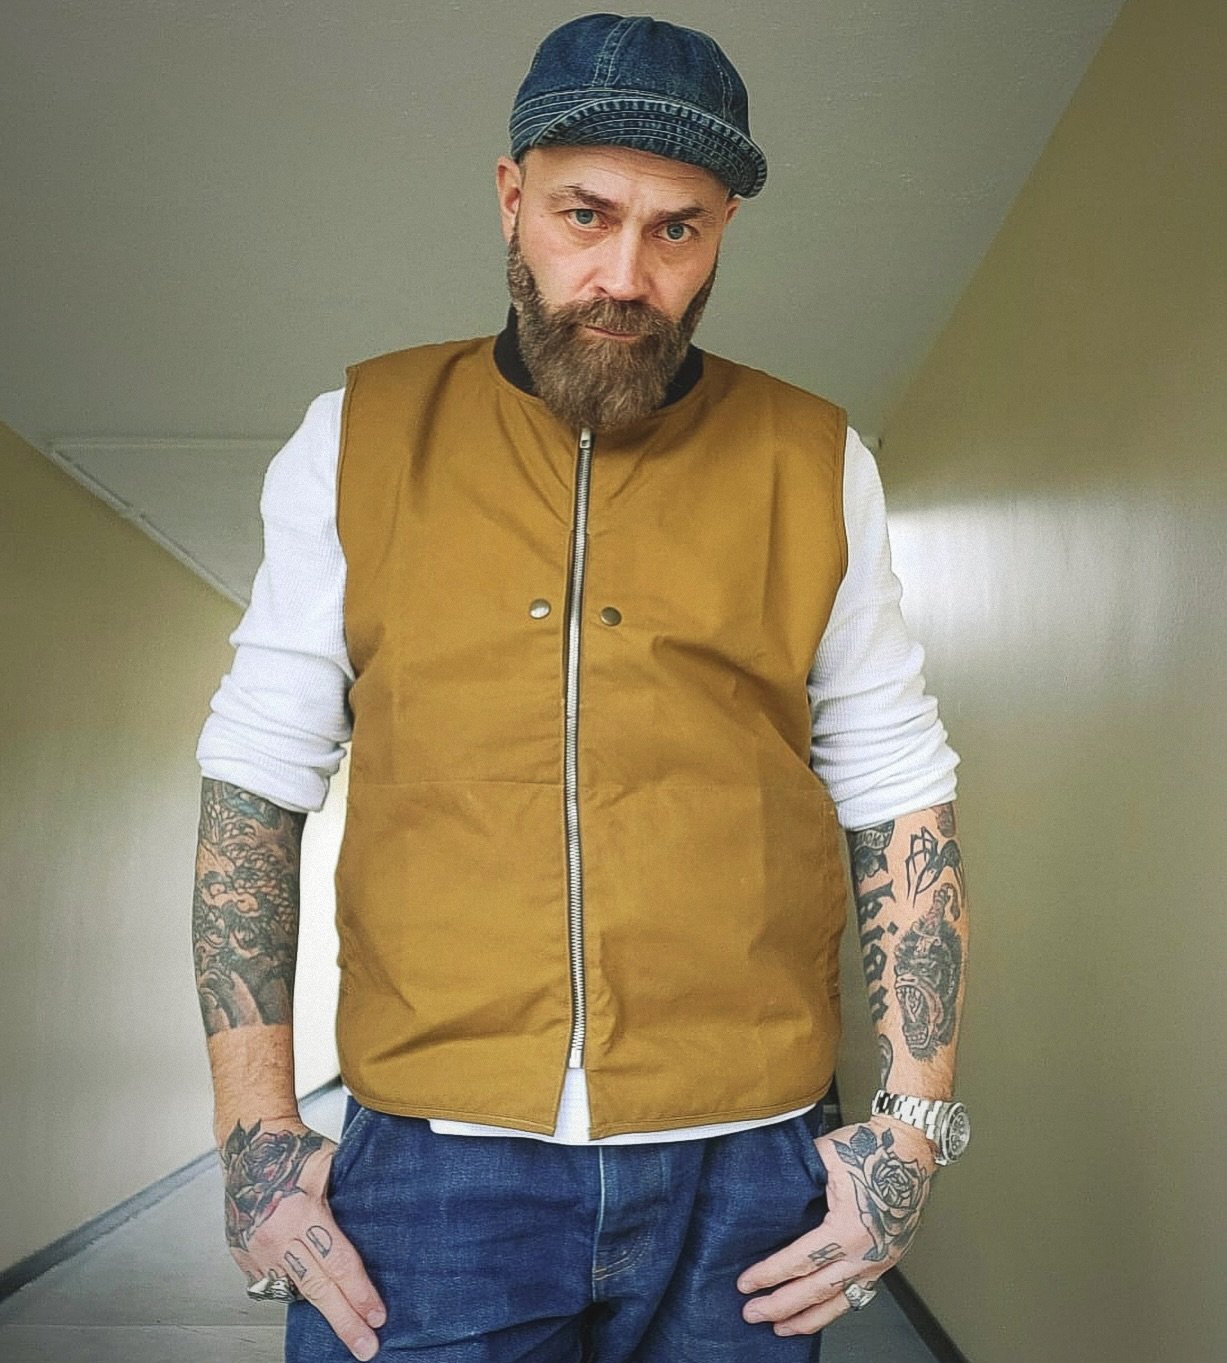 Still mixed 🌧️☀️ try some light wax &amp; denim
Antique Tan Waxed Vest
Sizes S -3XL
Loose Fit Taper 13.5oz Selvedge
Sizes 30-42

Military &amp; Workwear Style Inspired. 

Performance fabric &amp; construction led.

Classic heritage pieces

🕺 @justi